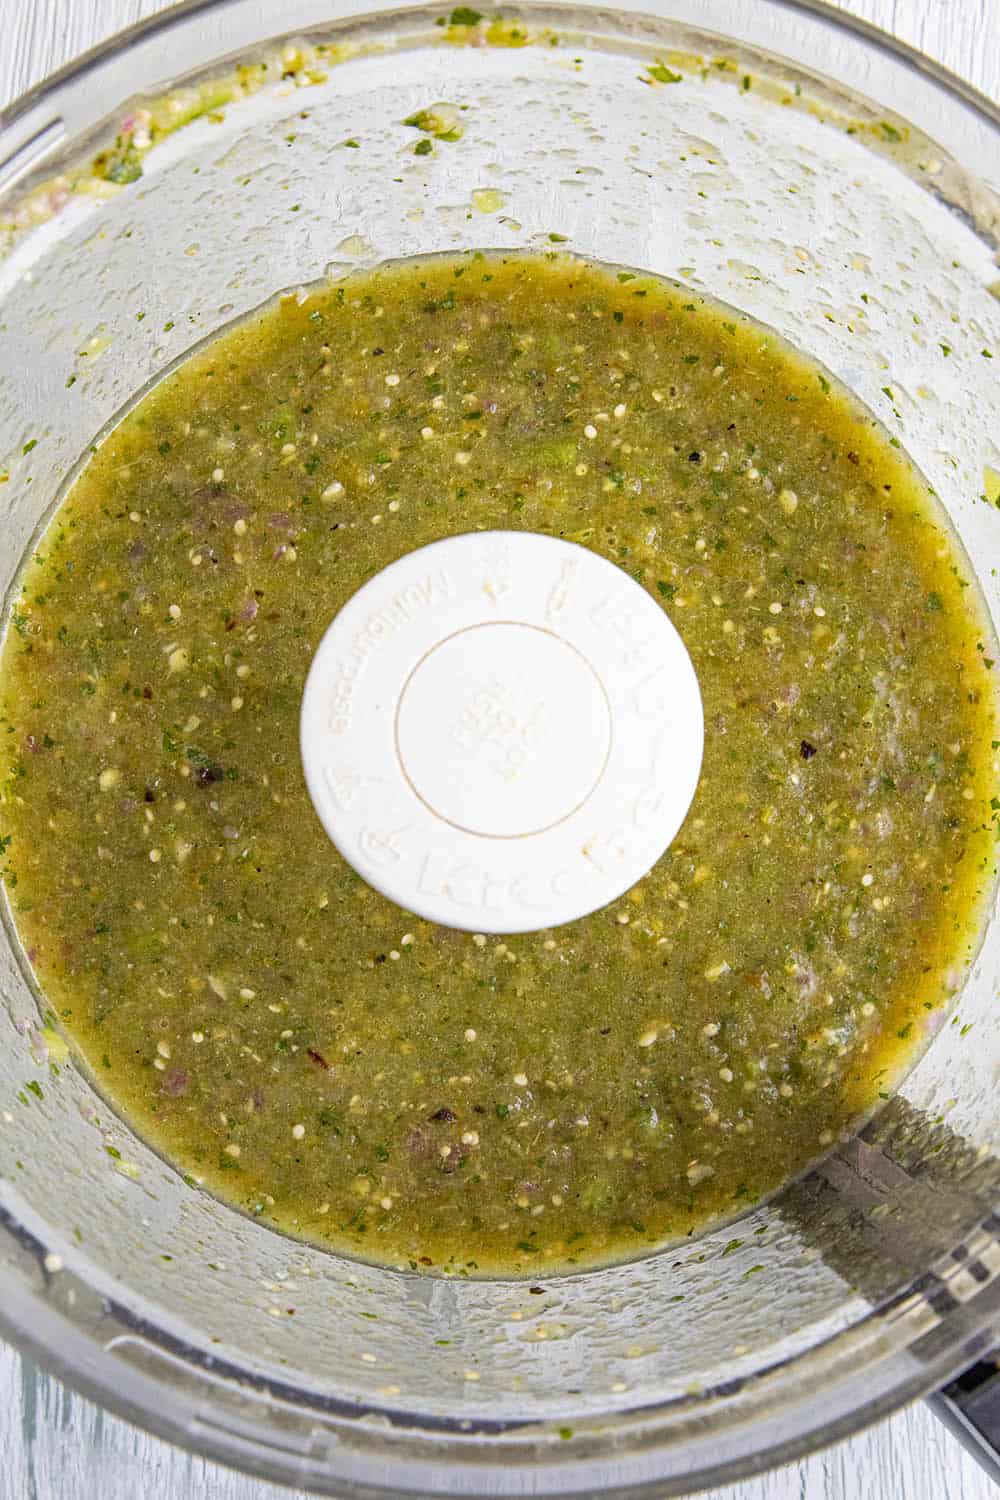 Tomatillo sauce, processed in a food processor